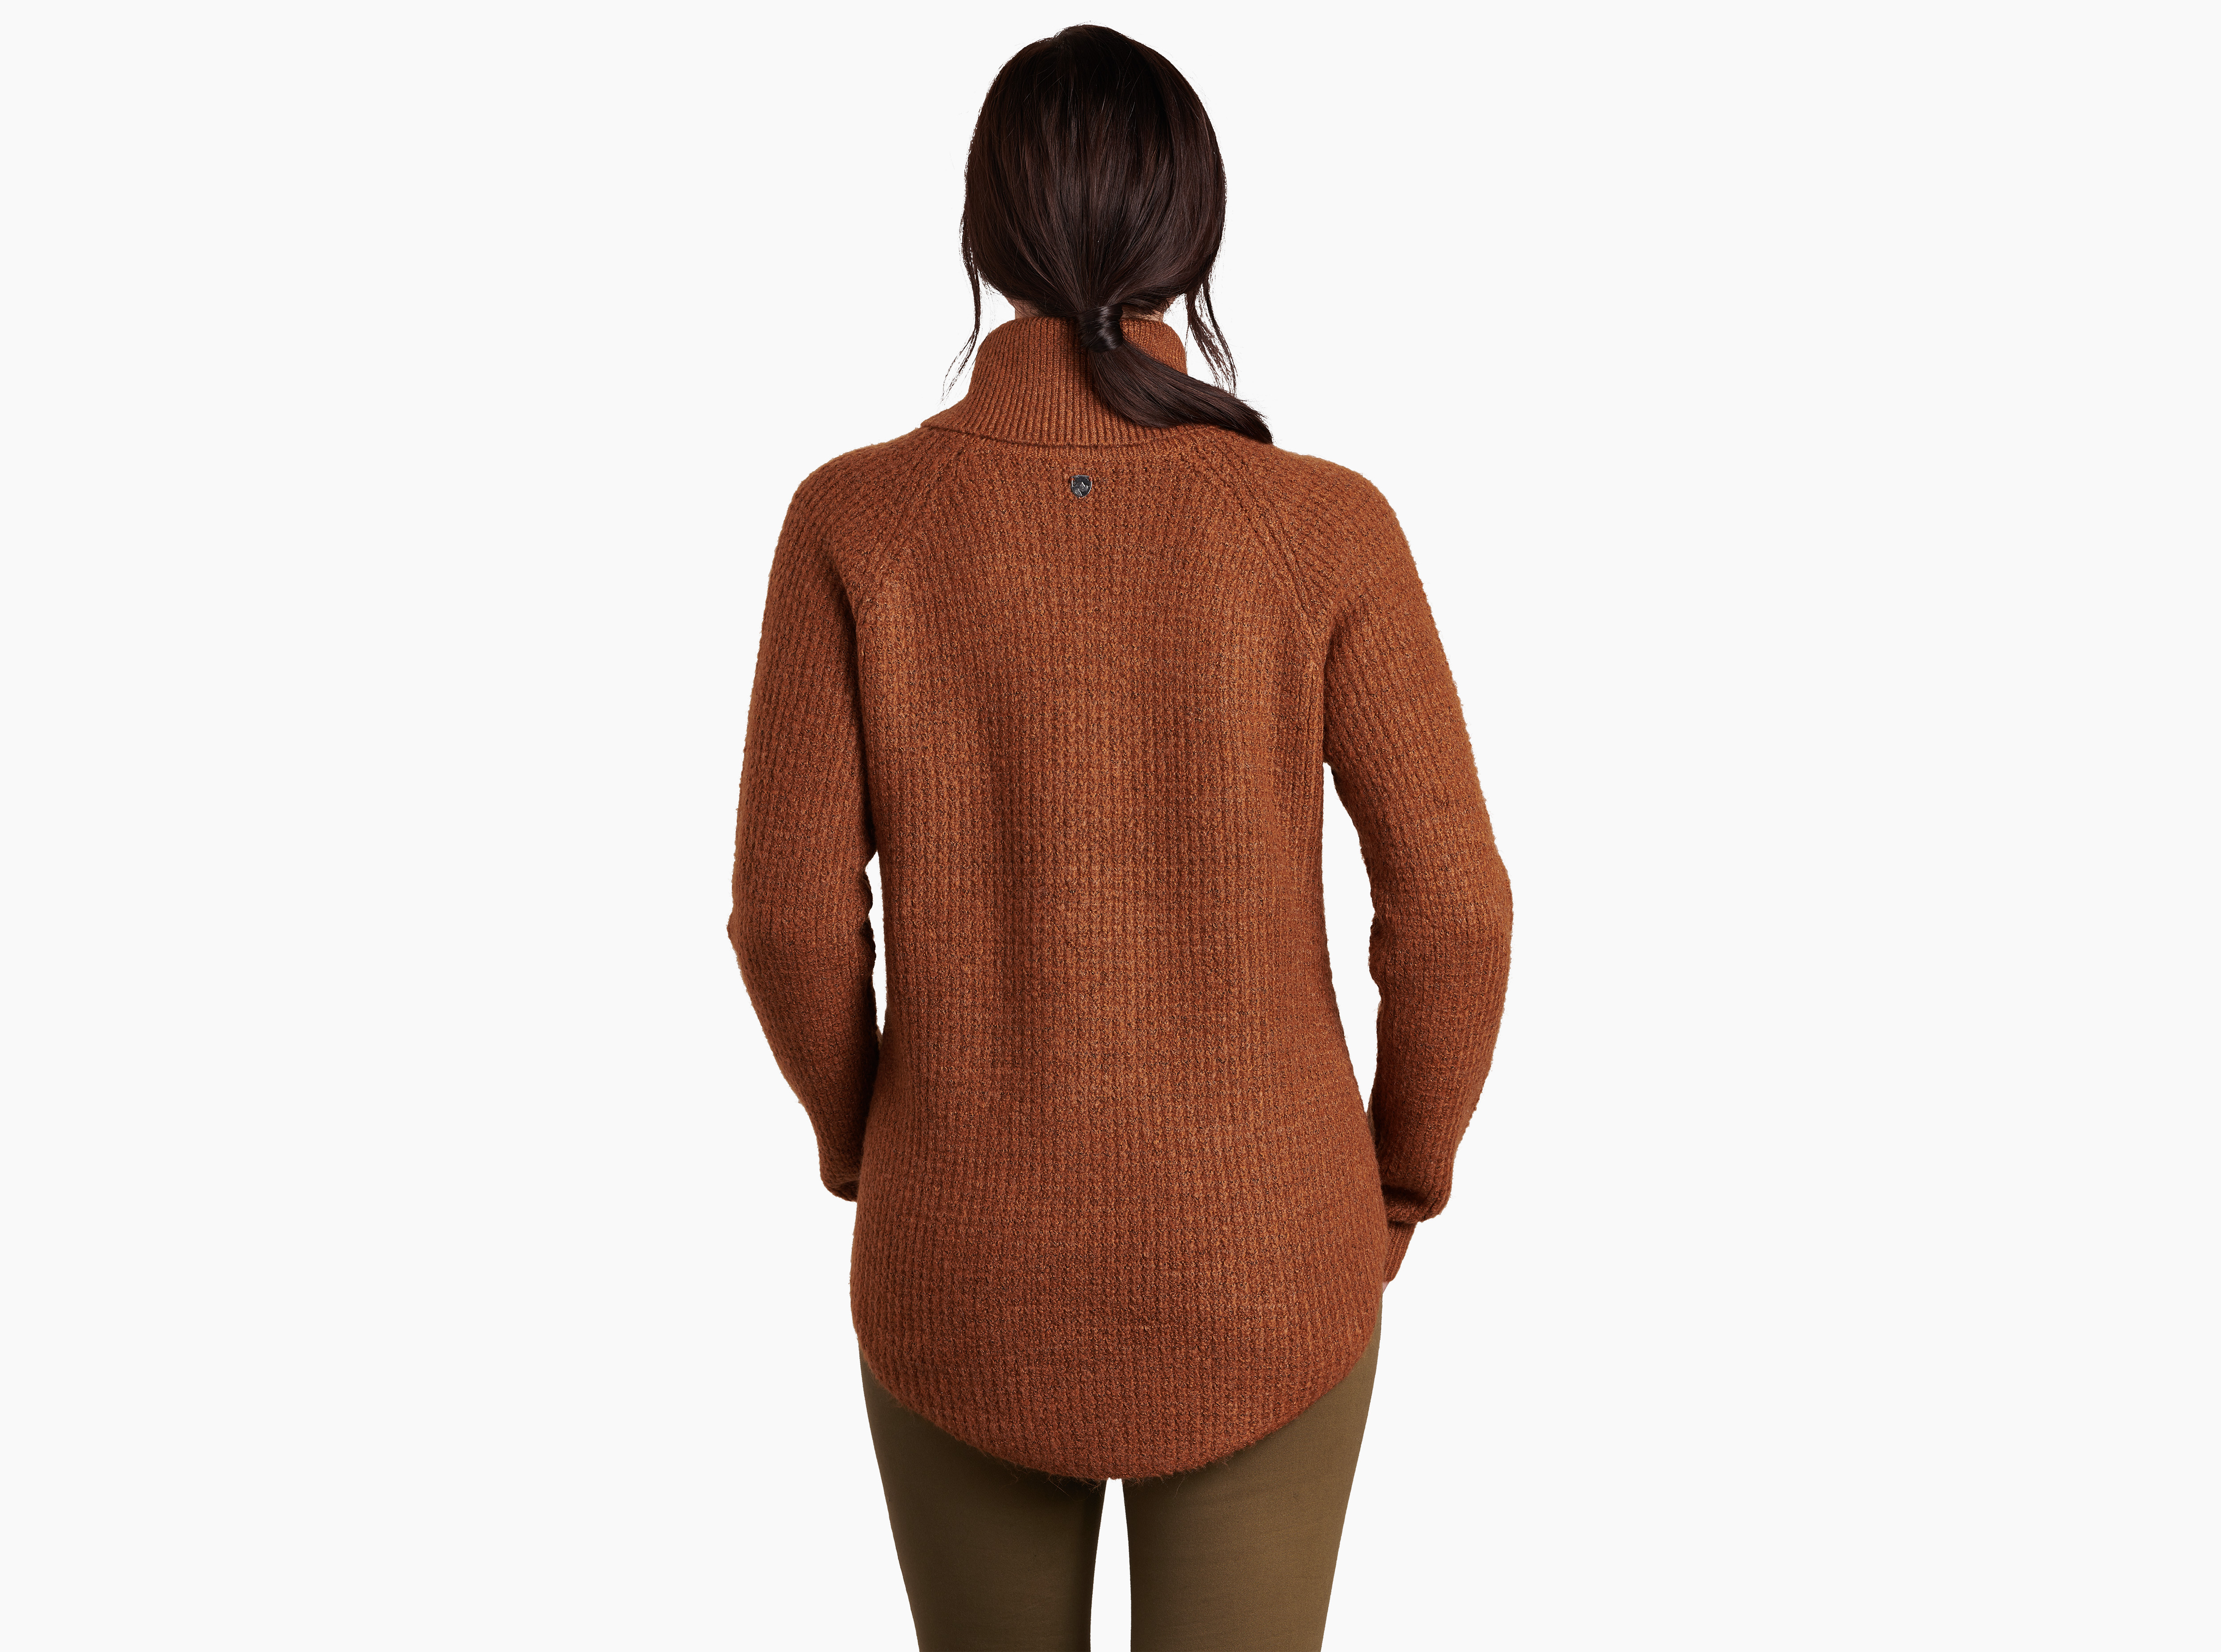 Kuhl Women's Cowl Neck Sweater Size M - $28 - From Taylor